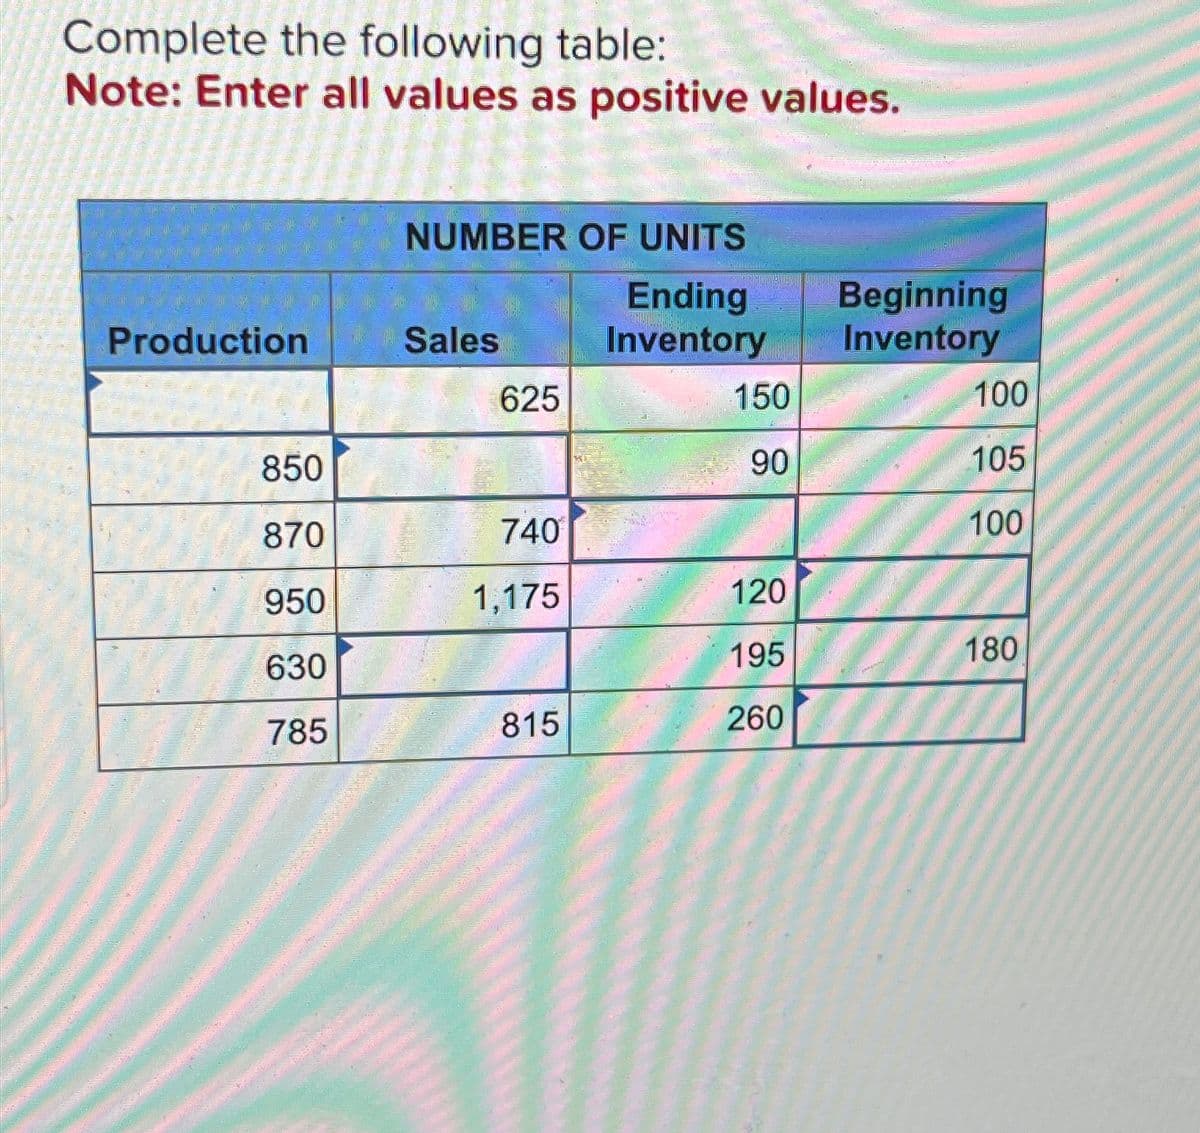 Complete the following table:
Note: Enter all values as positive values.
Production
850
870
950
630
785
NUMBER OF UNITS
Ending
Inventory
Sales
225-12
625
740
1,175
815
150
90
120
195
260
Beginning
Inventory
100
105
100
180